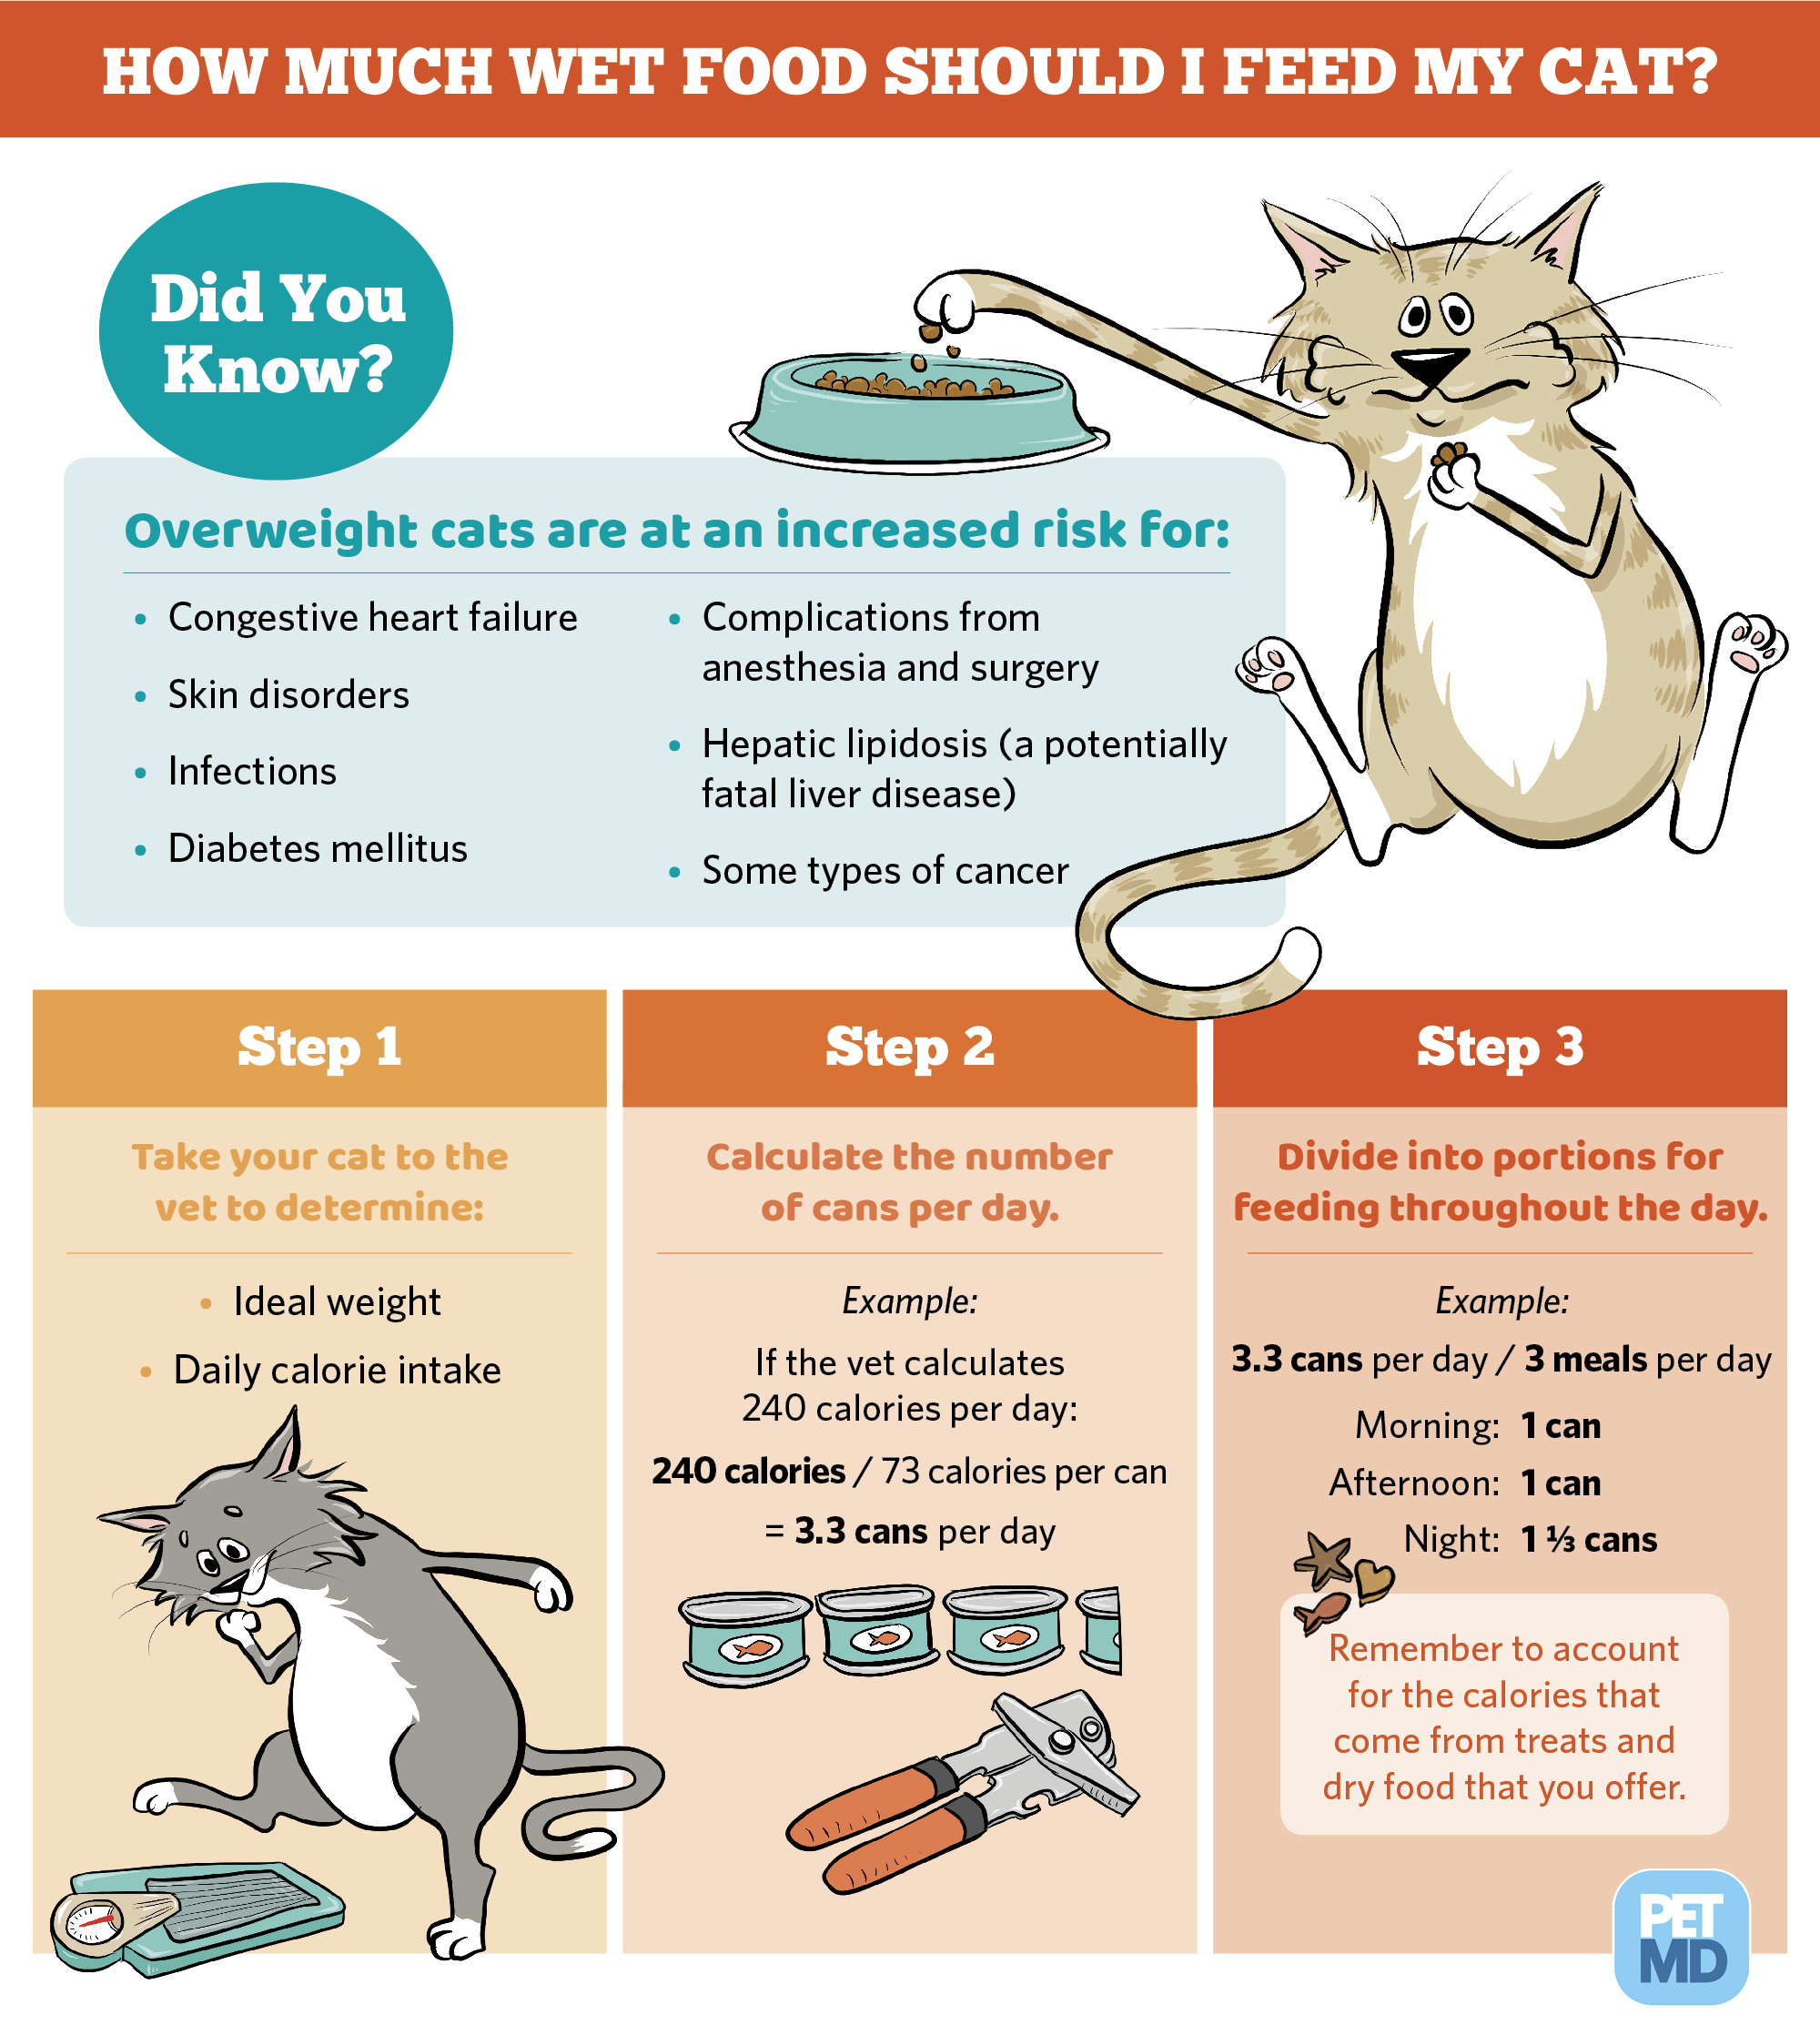 Follow this guide to figure out how much wet food to feed ...